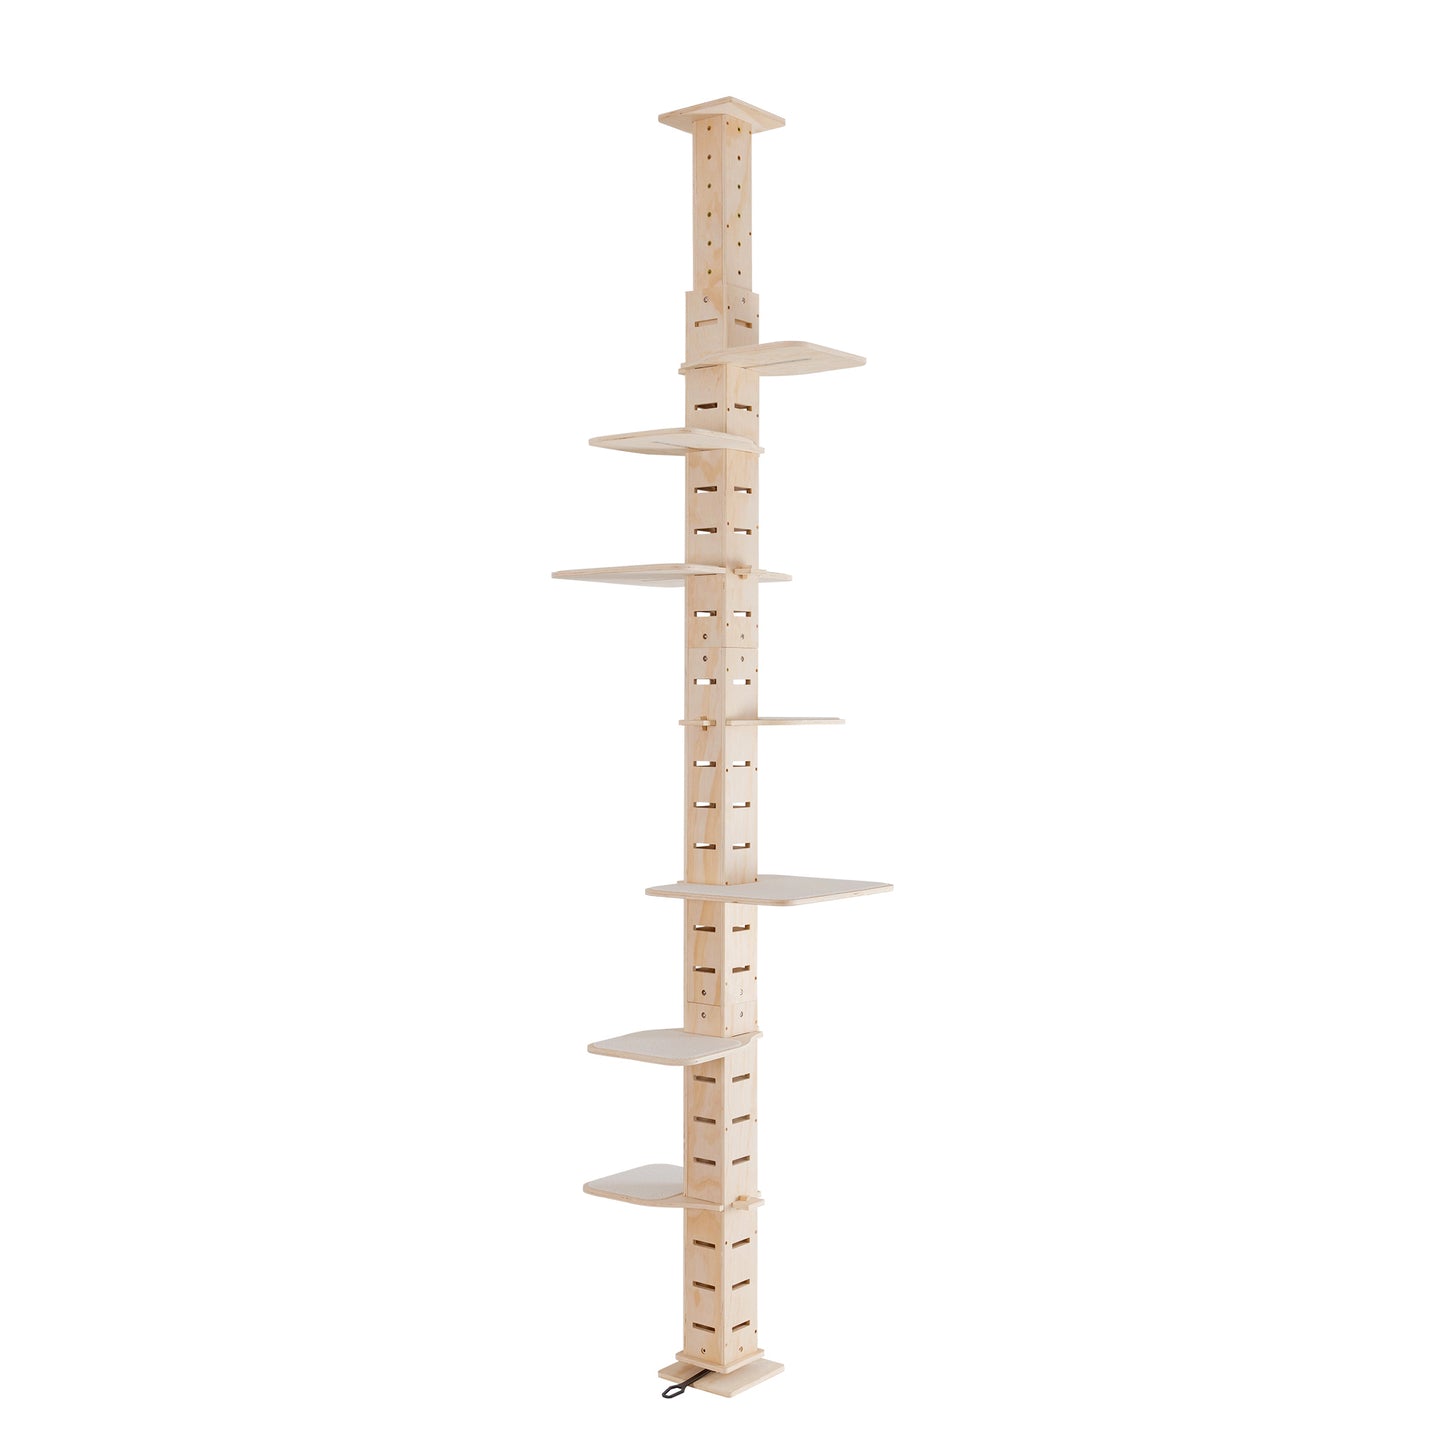 9' Adjustable Height Floor-to-Ceiling Cat Tree, Multi-Level Cat Vertical Cat Condo, Cat Climbing Frame Activity Center with Perching Shelves for Indoor Cats, Natural